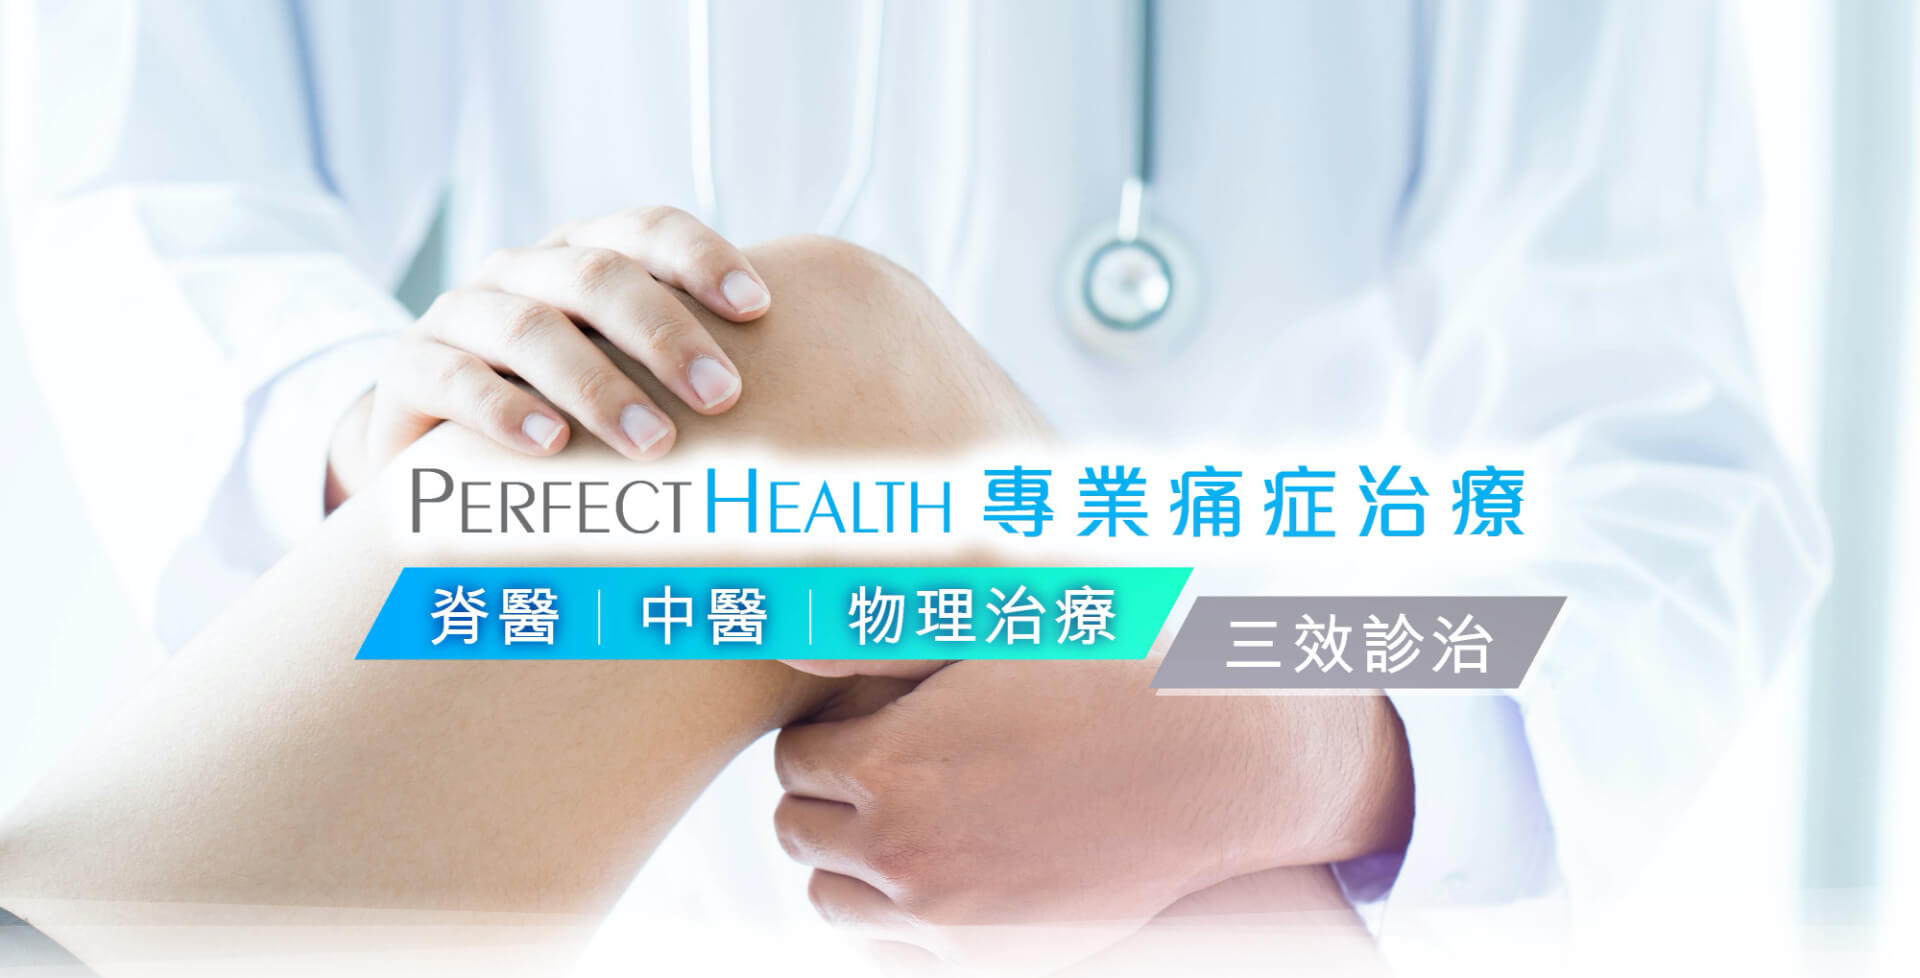 Perfect Health Banner 1